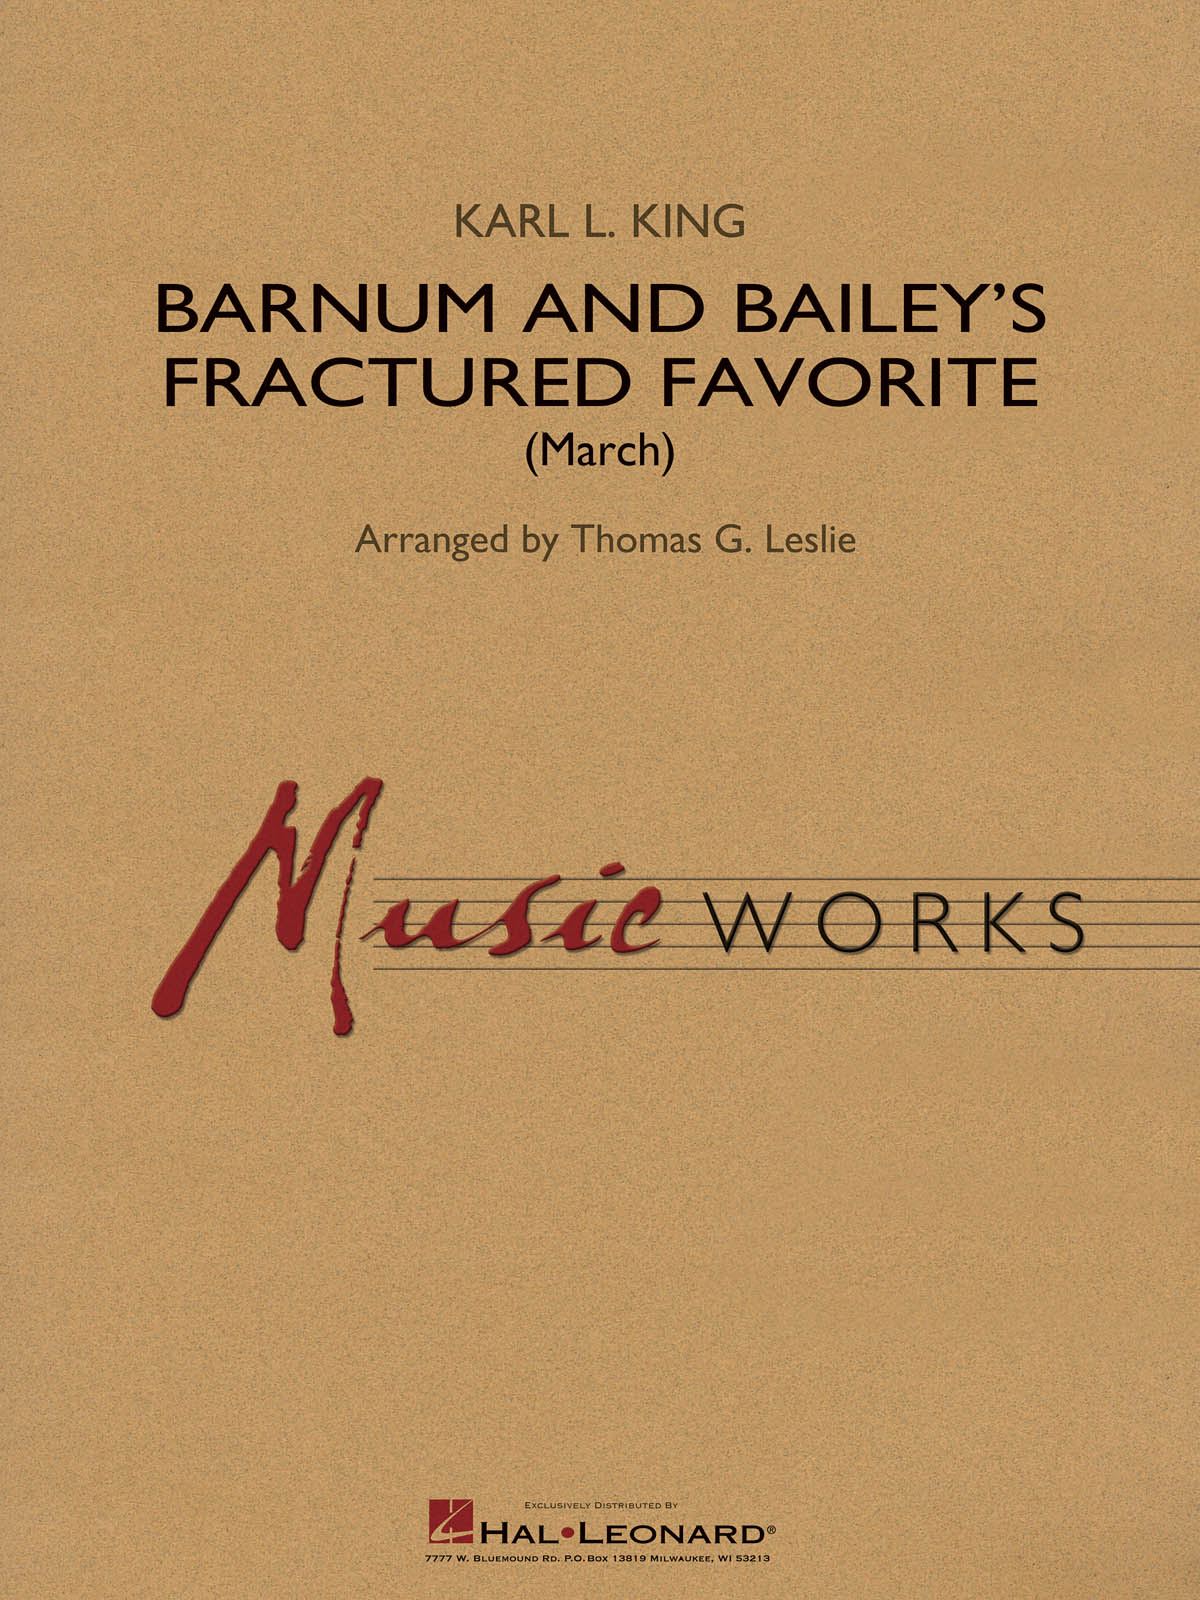 Karl L. King: Barnum and Bailey's Fractured Favorite: Concert Band: Score